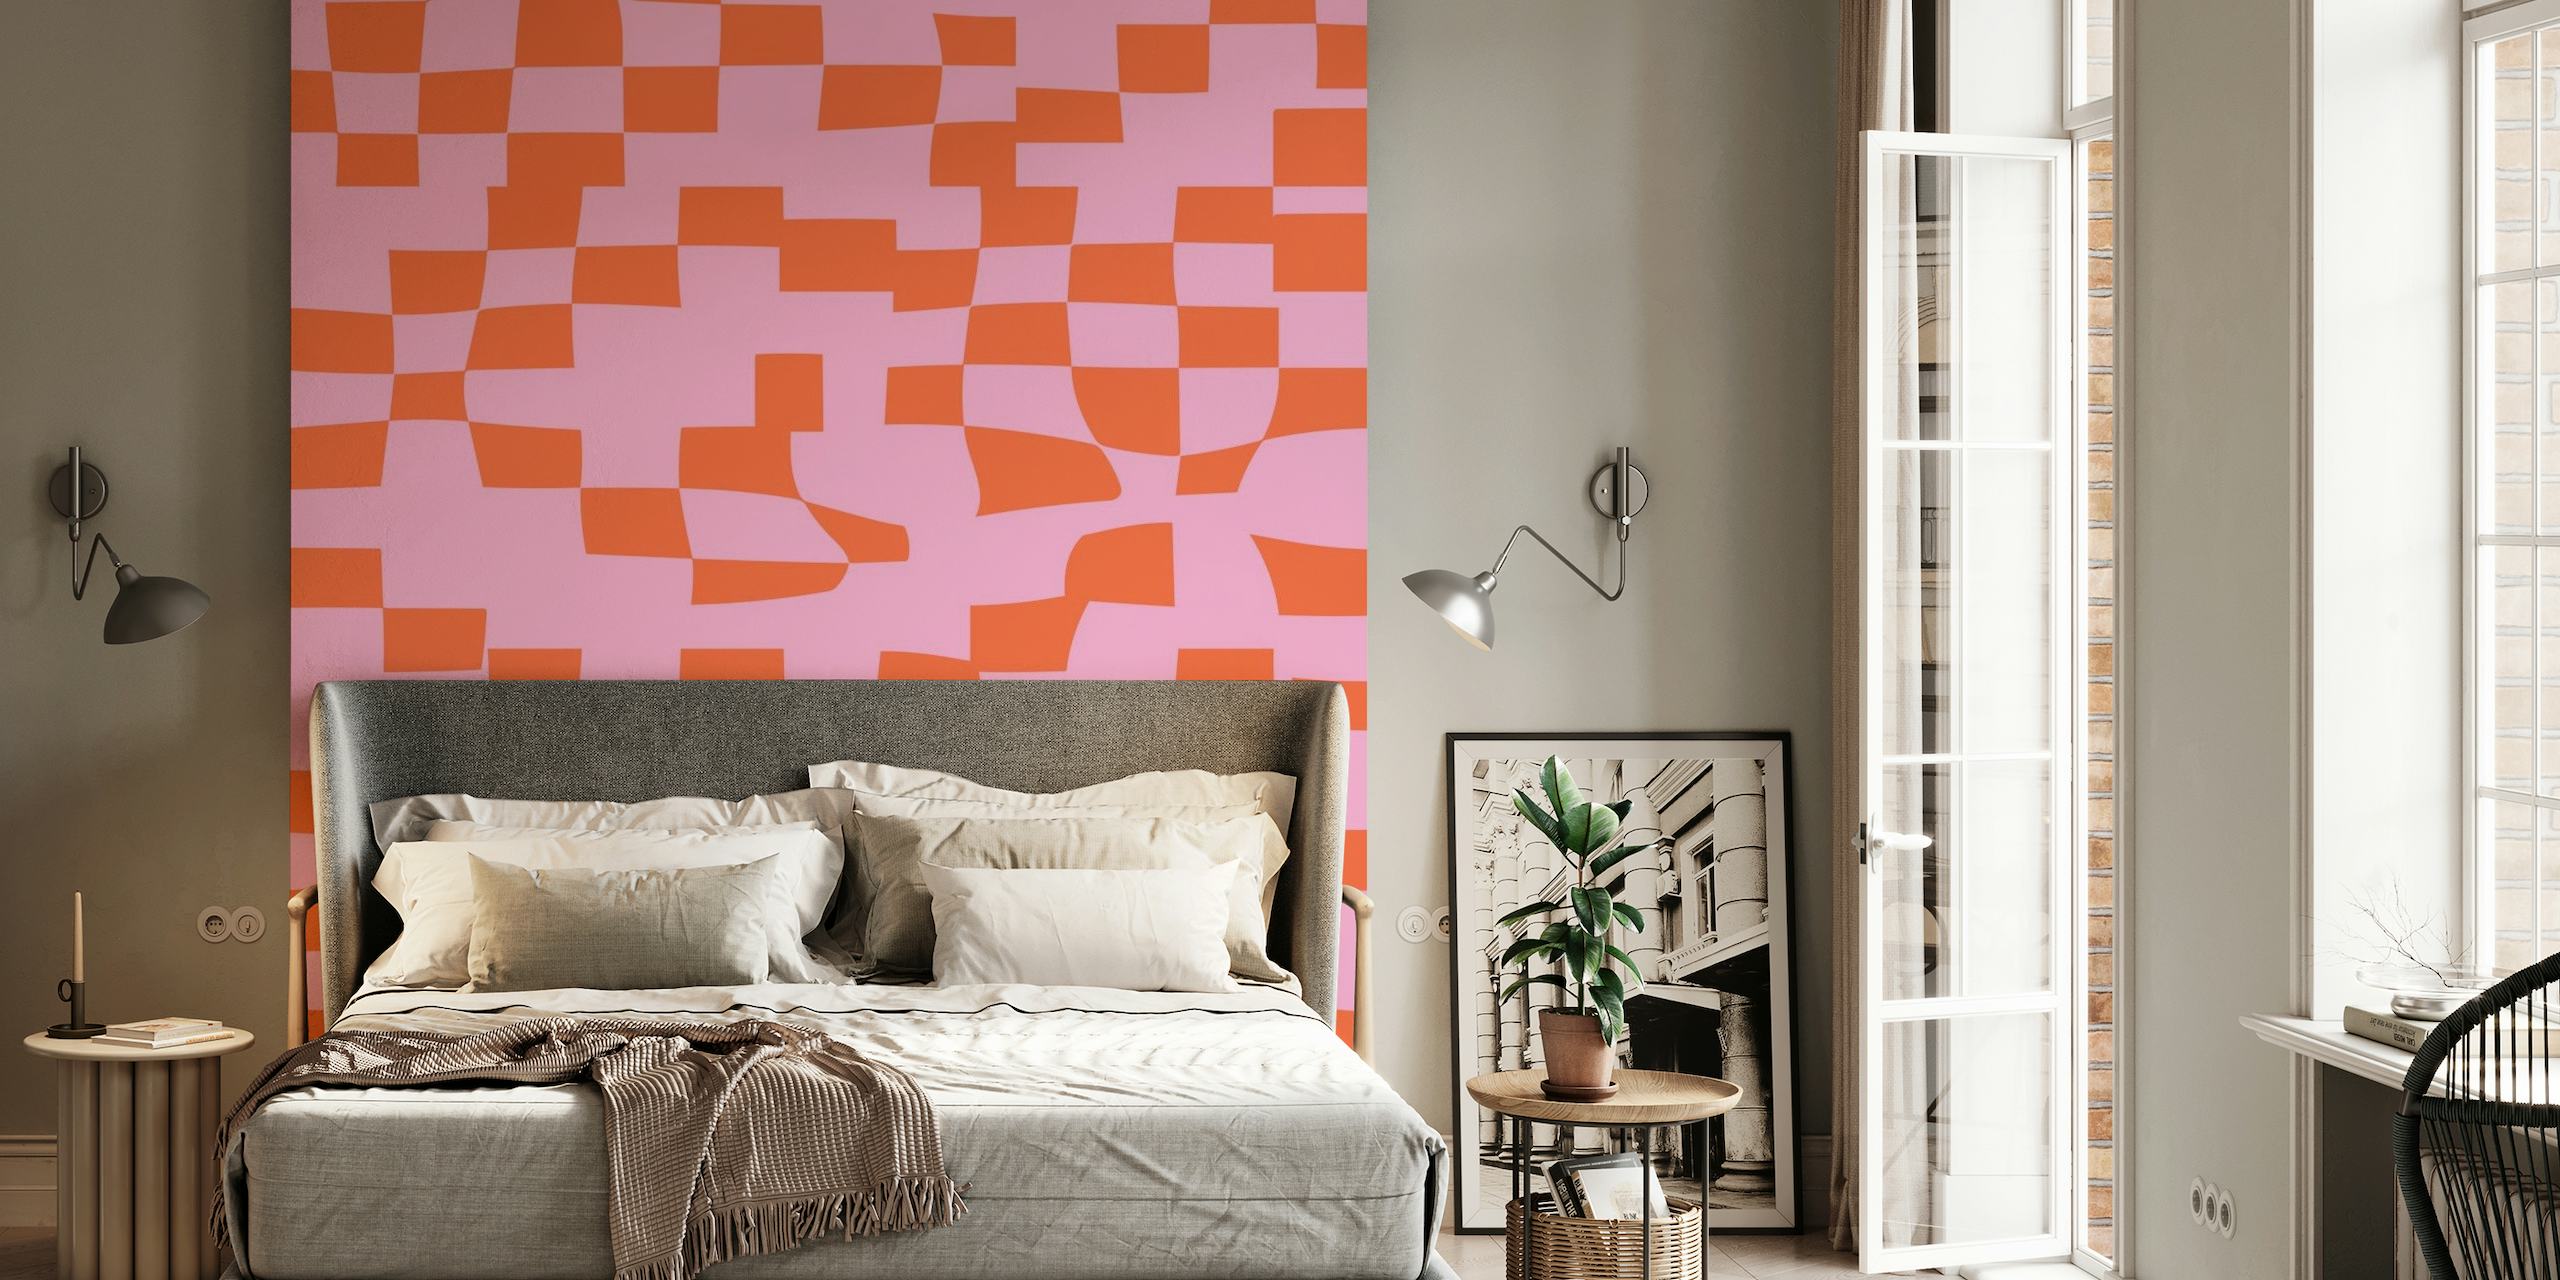 Abstract Checkerboard in Pink and Orange papel pintado